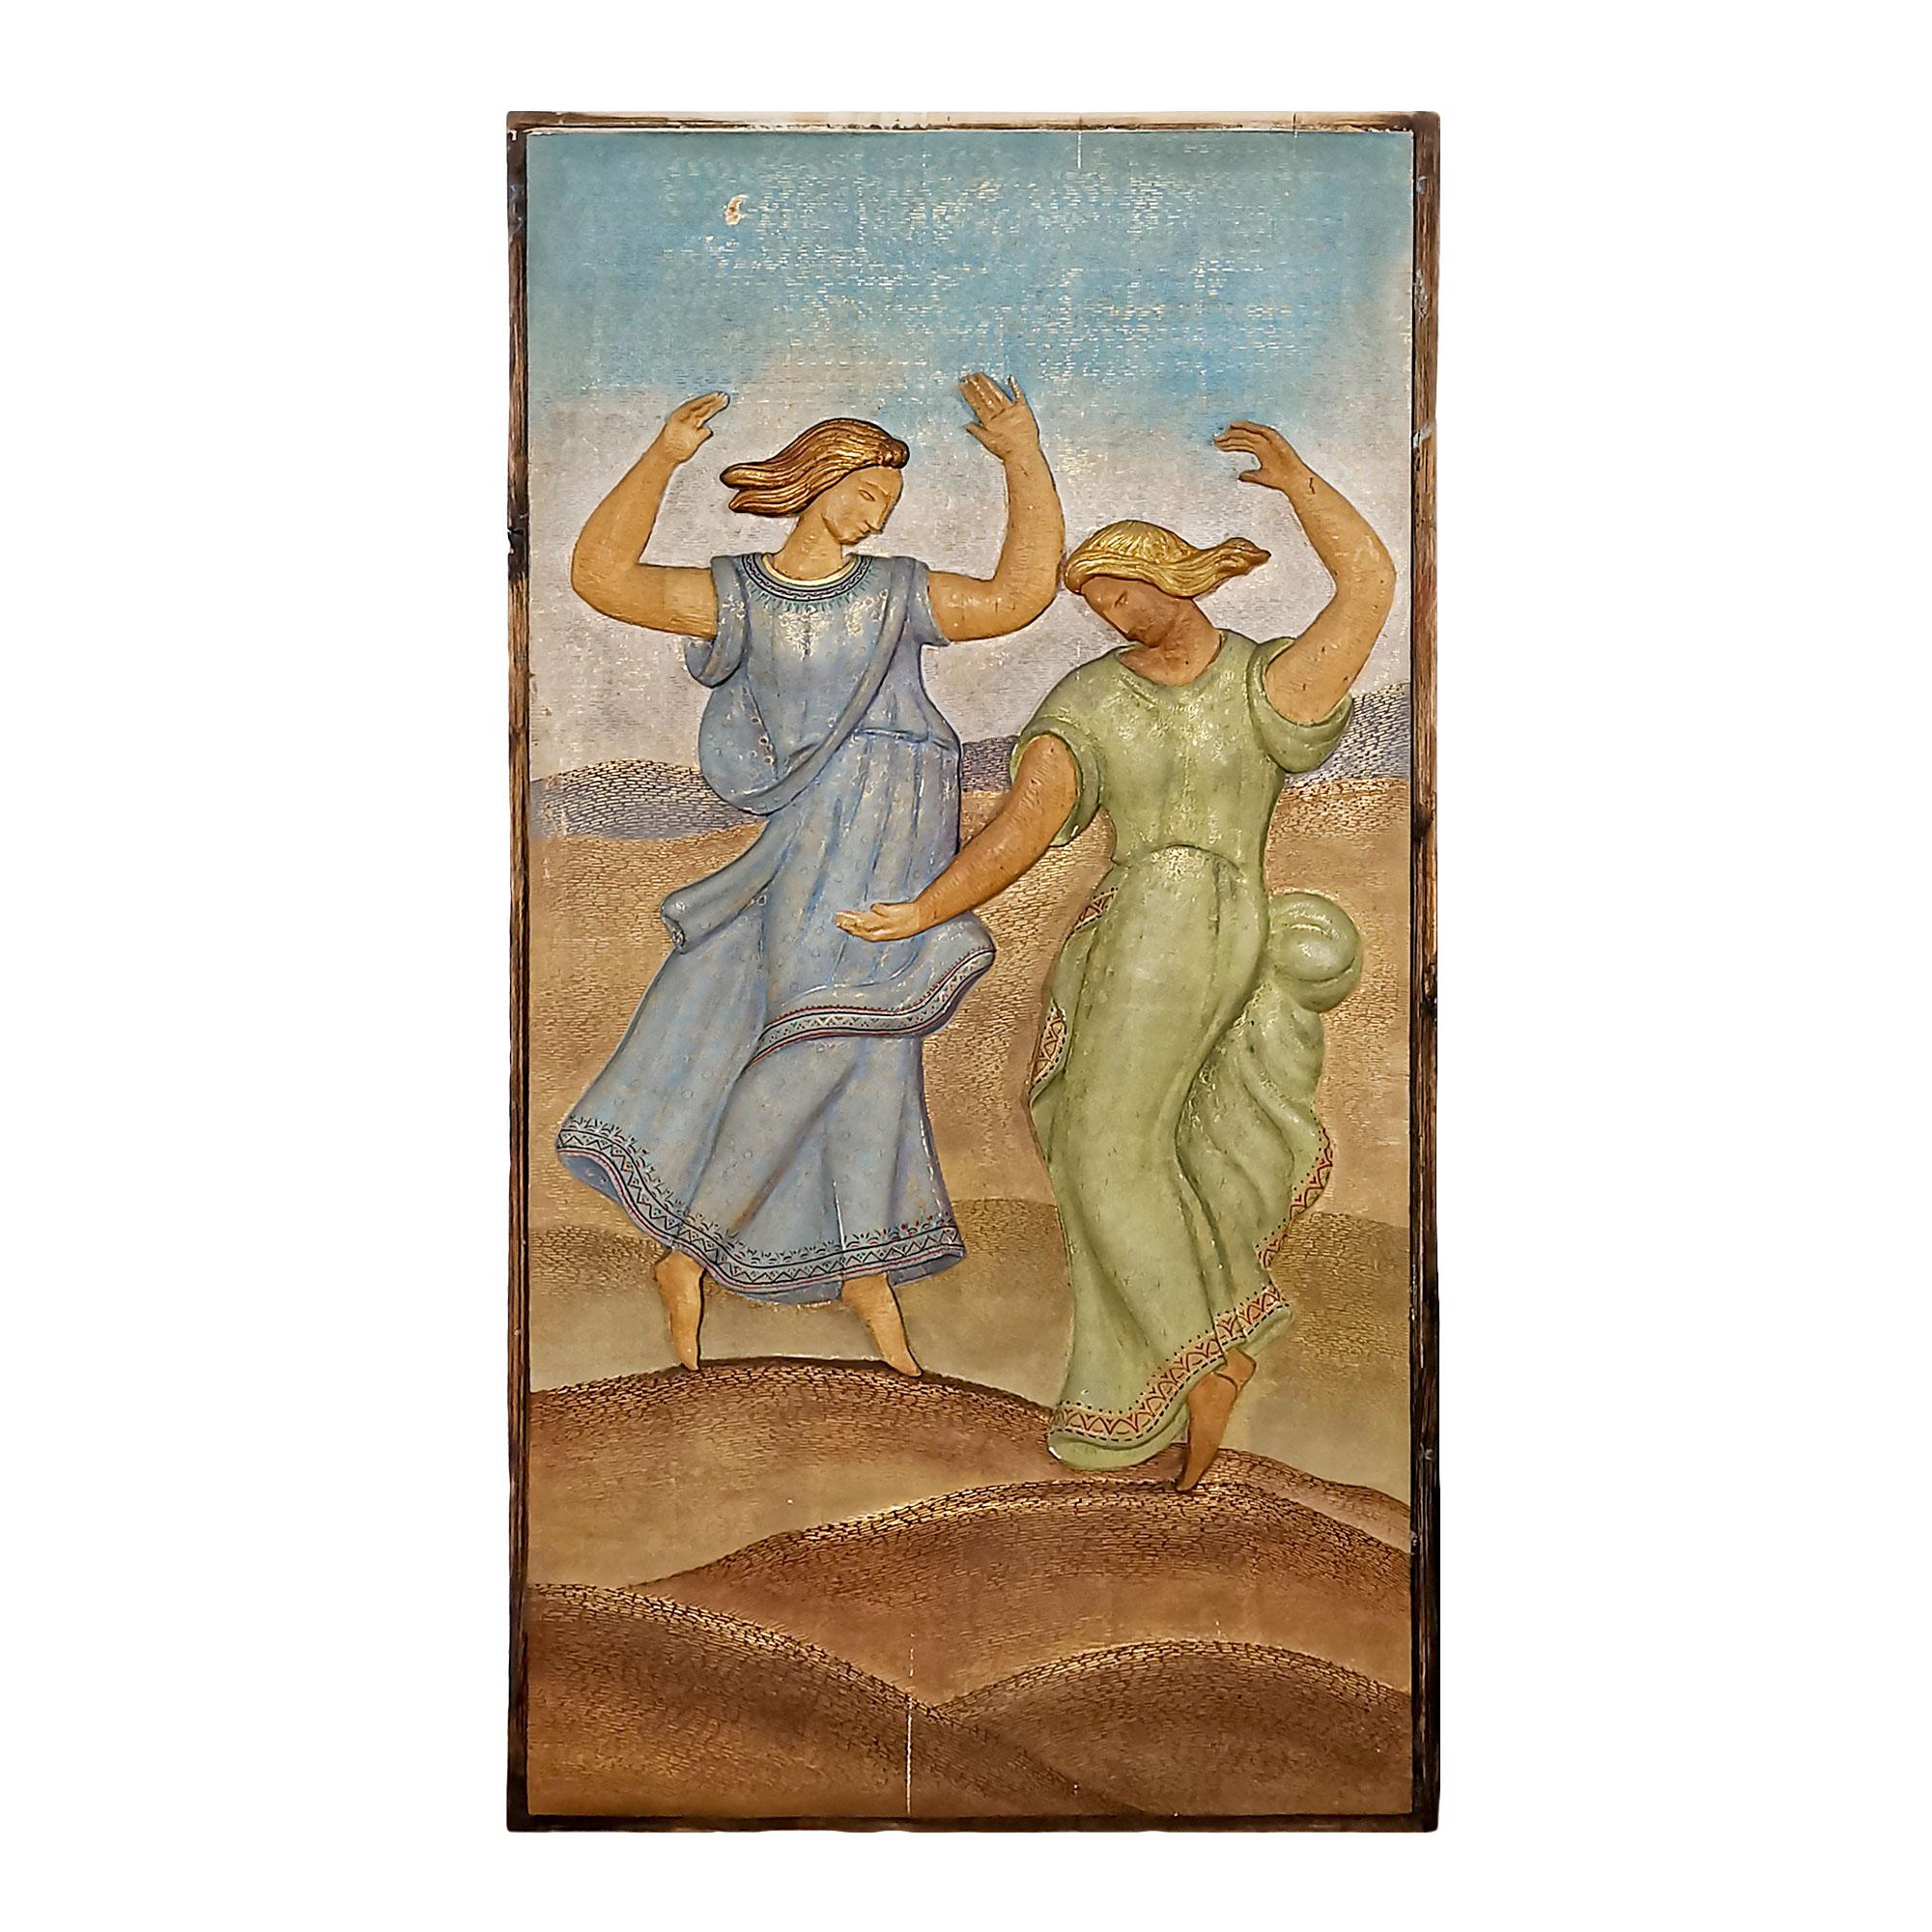 Set of five relief decorative panels, handmade carved and painted on solid wood, dance and music scenes. Extremely fine work with Art Deco inspiration.
Signed and dated: A Trapote Mateo 1964.
Spain

Measurement:
Big panels 47 x 3 x 92 cm Small